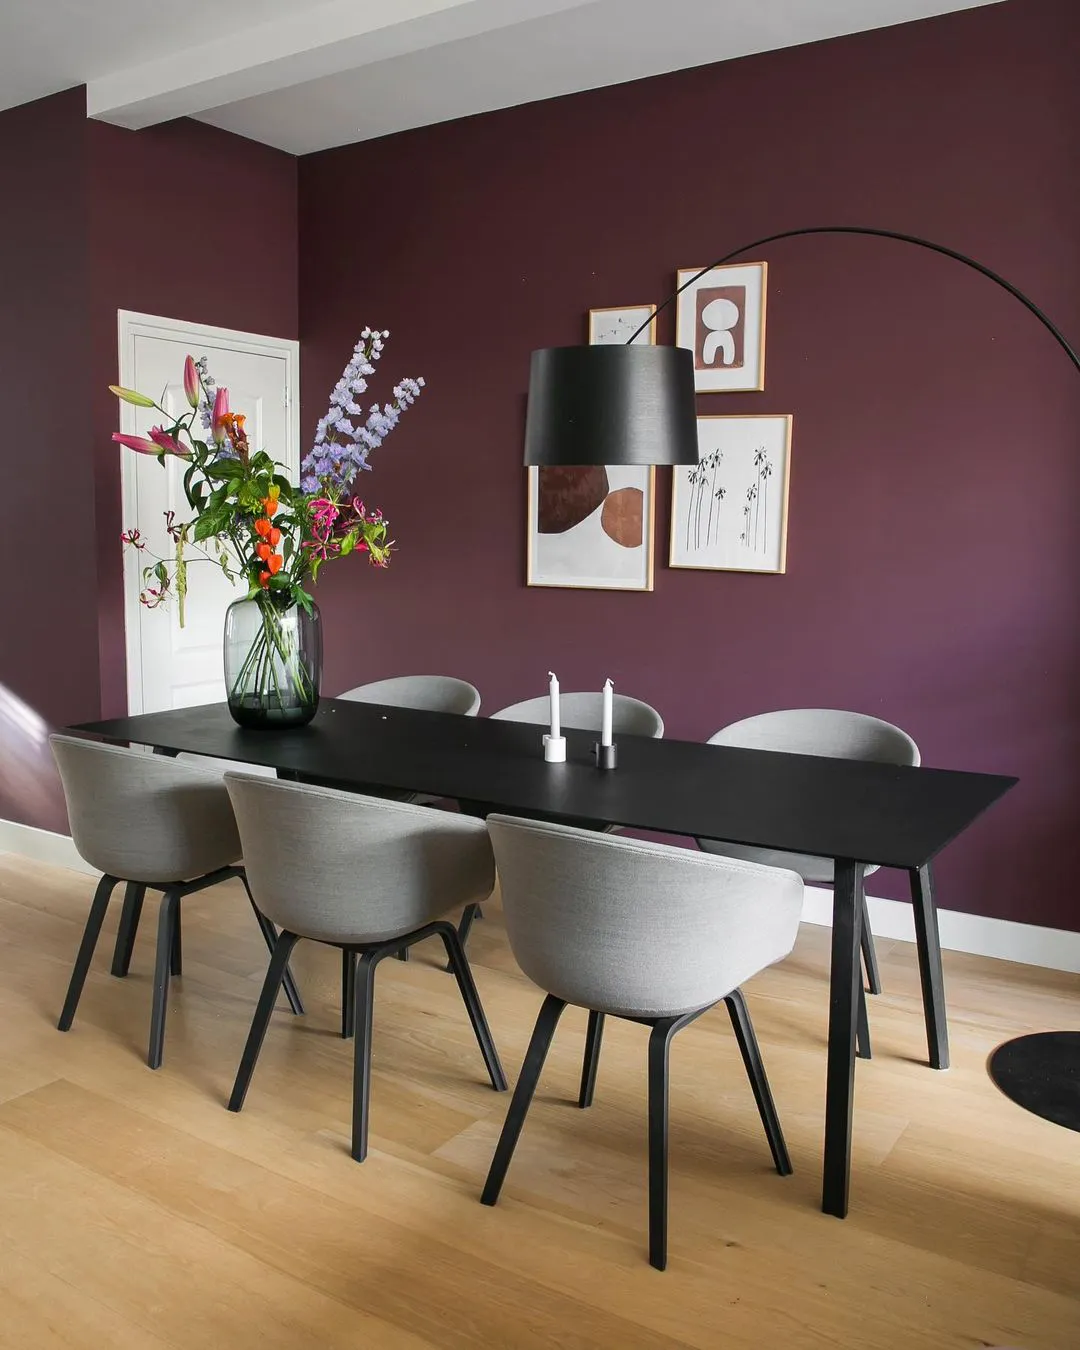 Dining room with plum walls